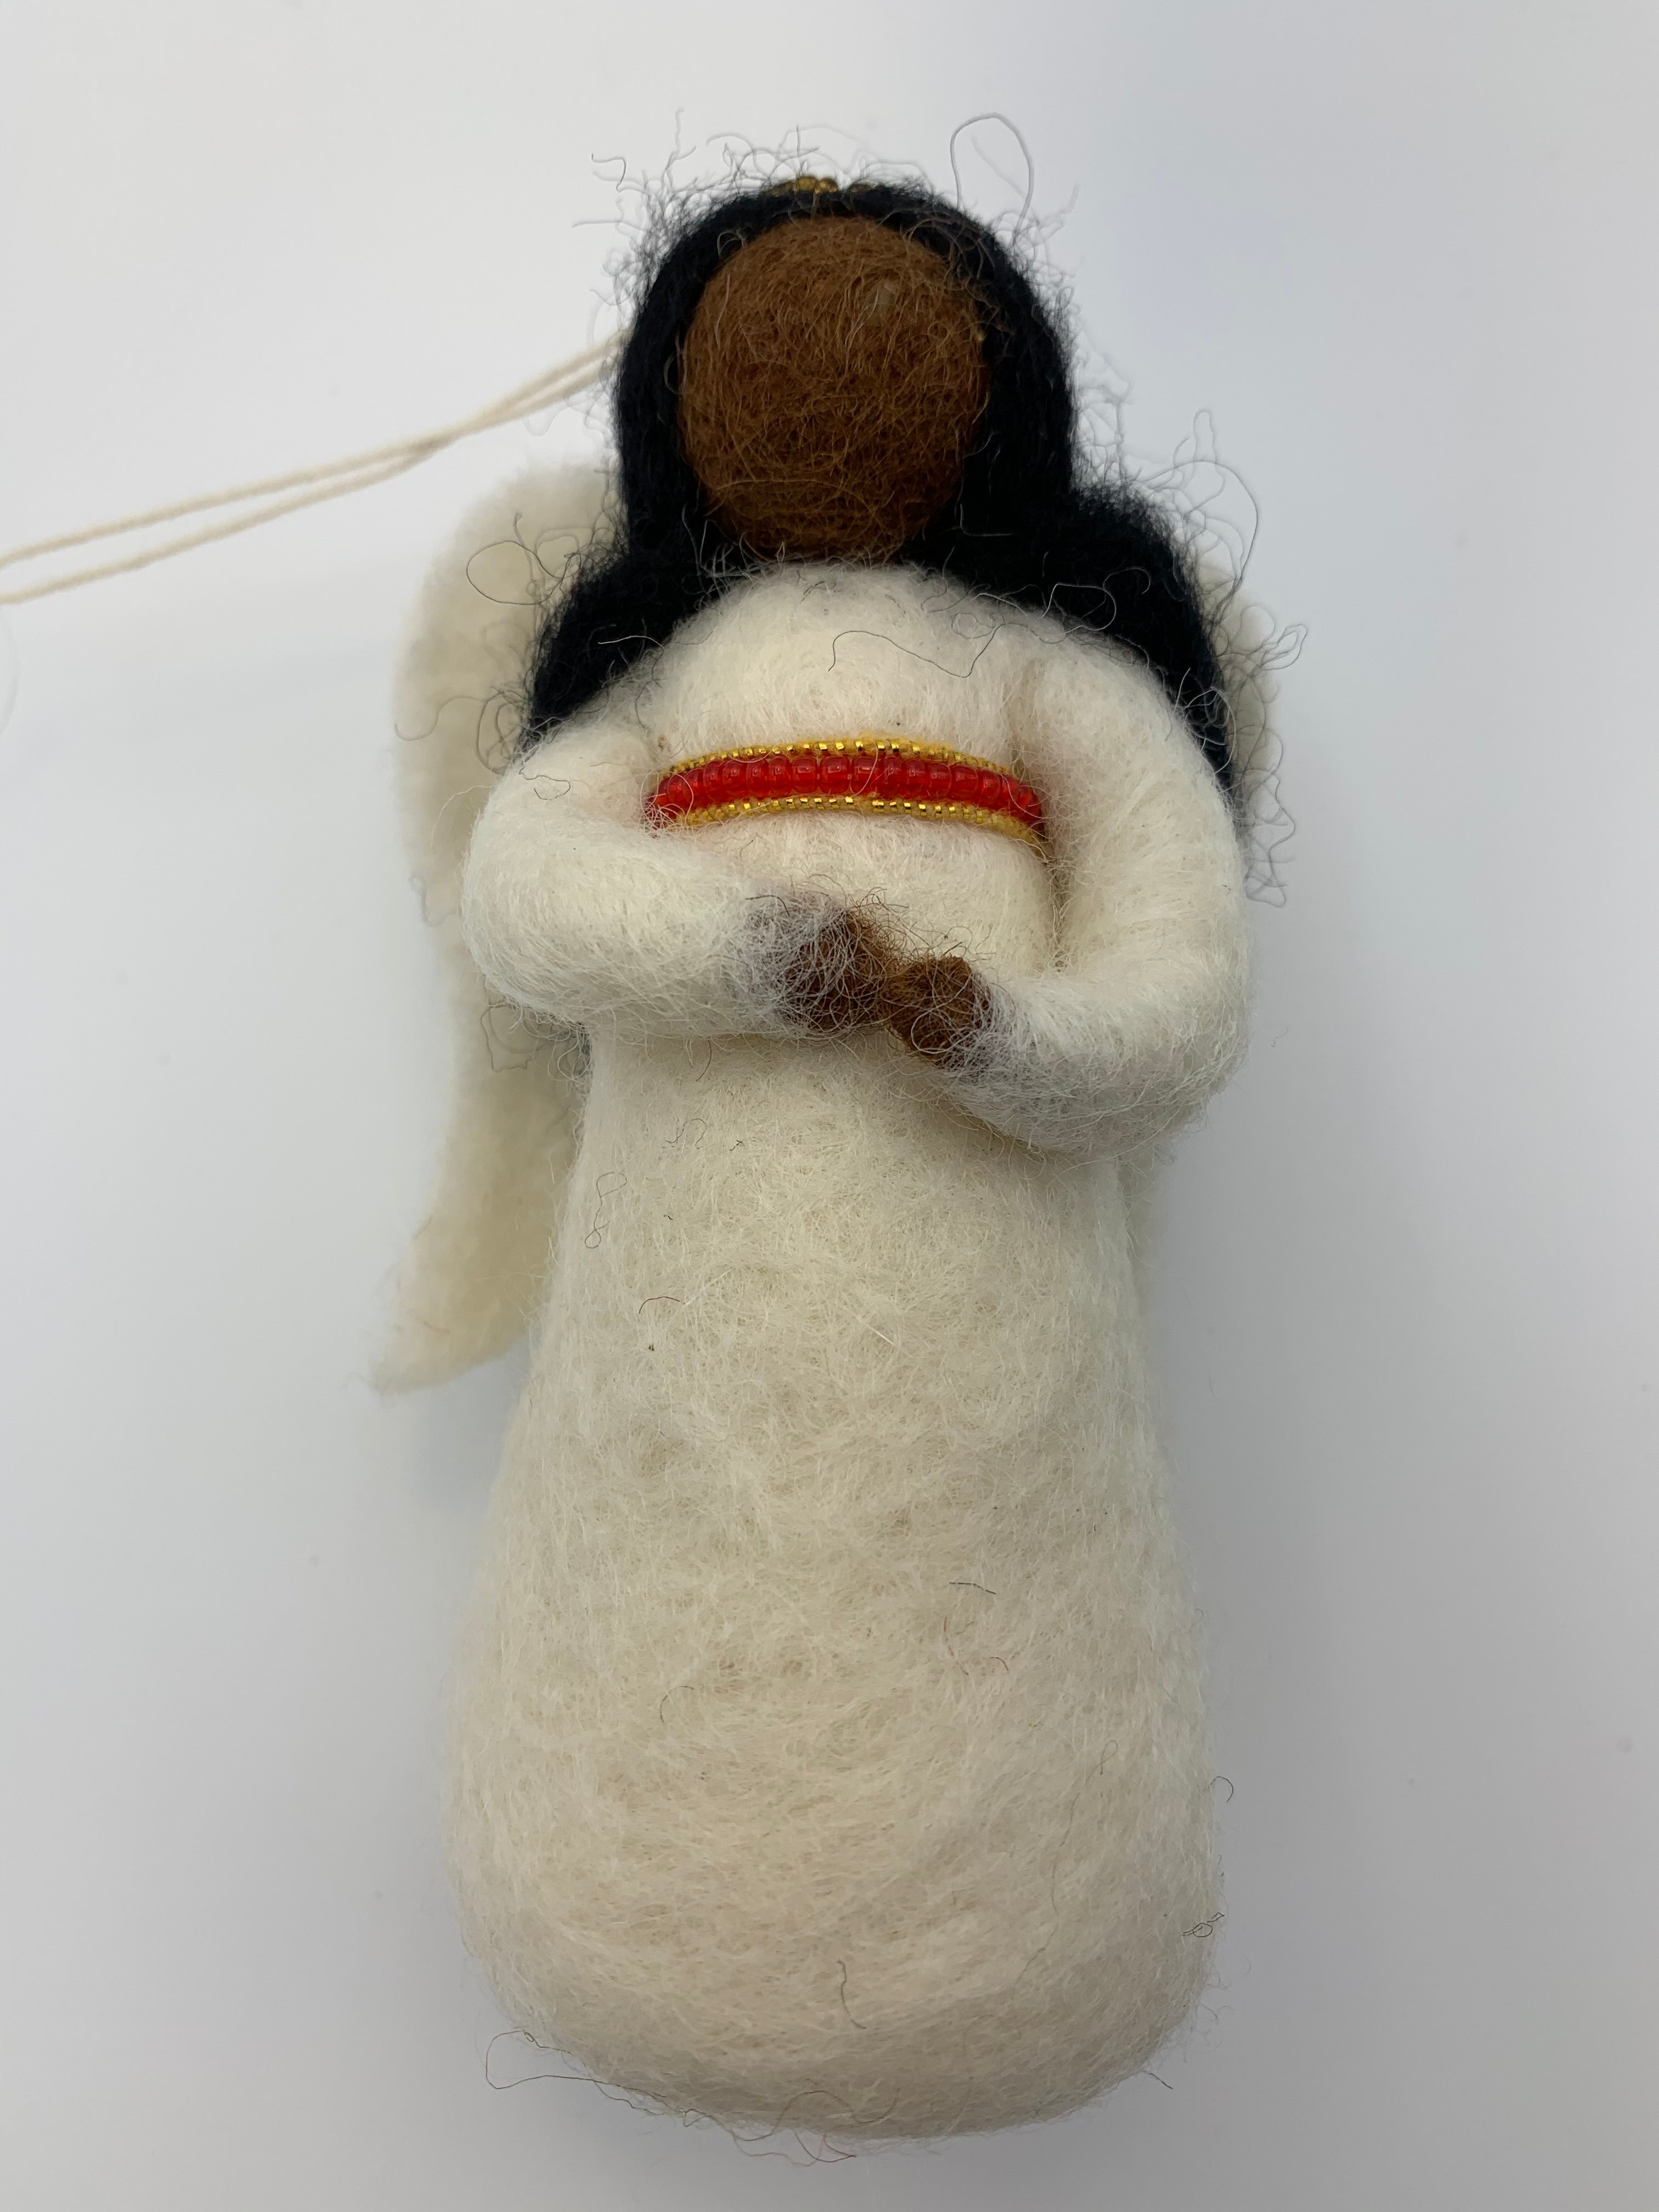 This is an close-up photo of an angel of color (black) Christmas ornament that is handcrafted (fair trade) and made of 100% natural wool. She wears a white dress accented with red and gold beading on empire waist, has a gold beaded halo, black face and hair and bendable arms. Approximately 5"x2.5". She comes with a fair trade holiday "to/from" tag to use if giving this as a gift.